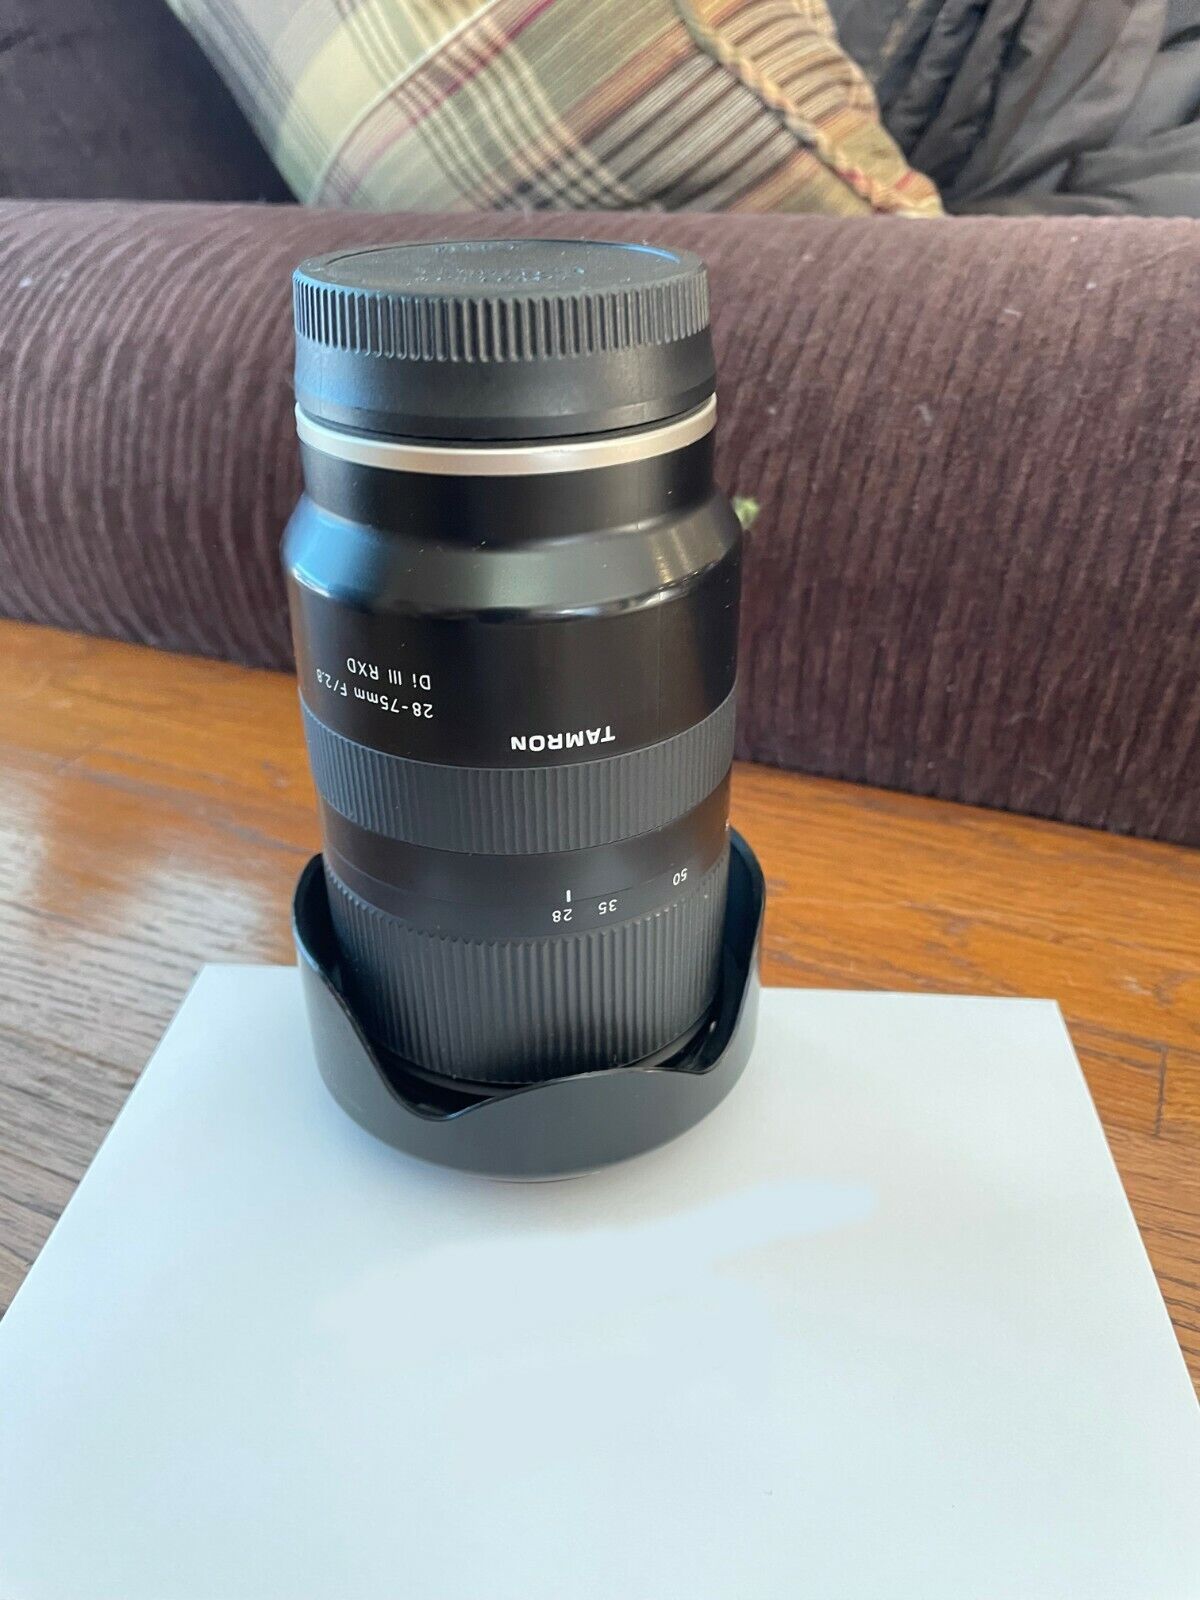 Tamron 28-75mm F/2.8 Di III RXD Lens for Sony- gently used g